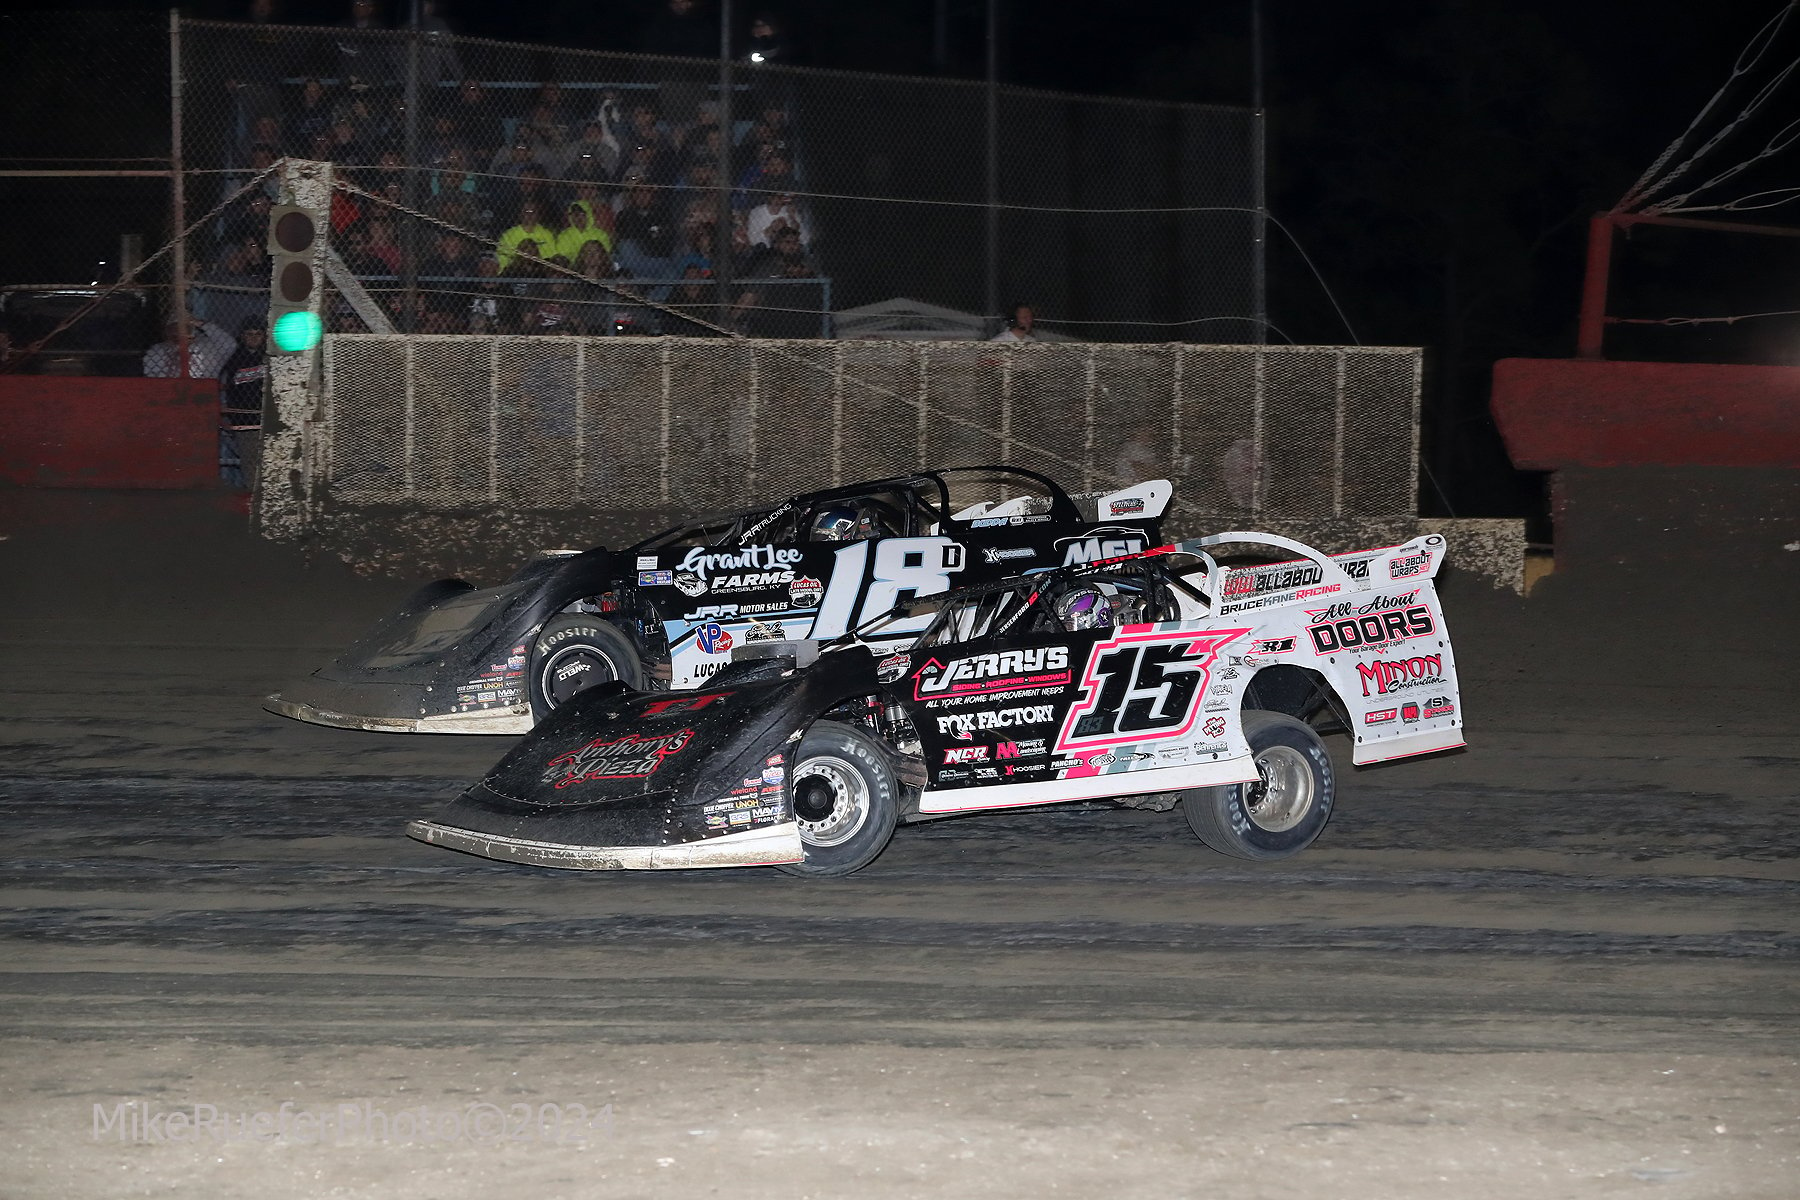 Mystery Surrounding Jensen Ford in Lucas Oil Late Model Dirt Series Race at East Bay Raceway